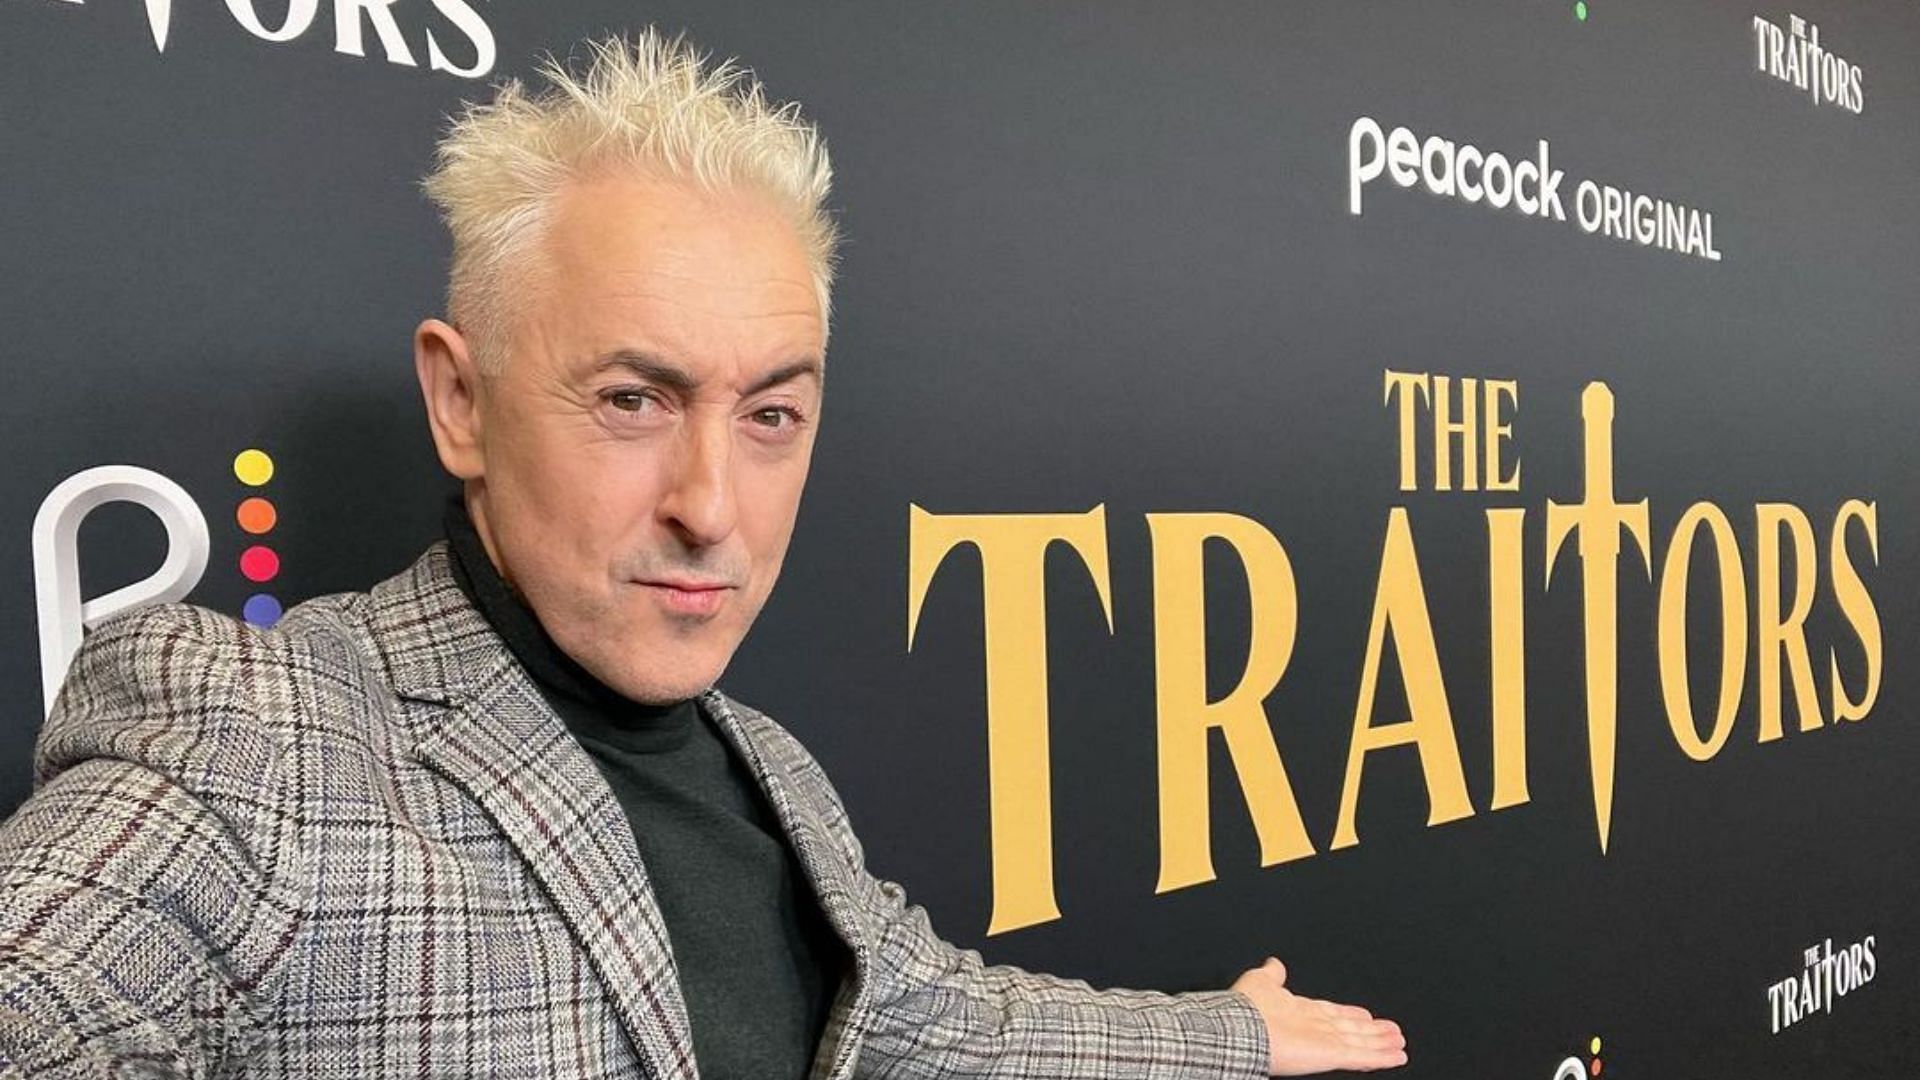 The Traitor, hosted by Alan Cumming is set to premiere on January 12